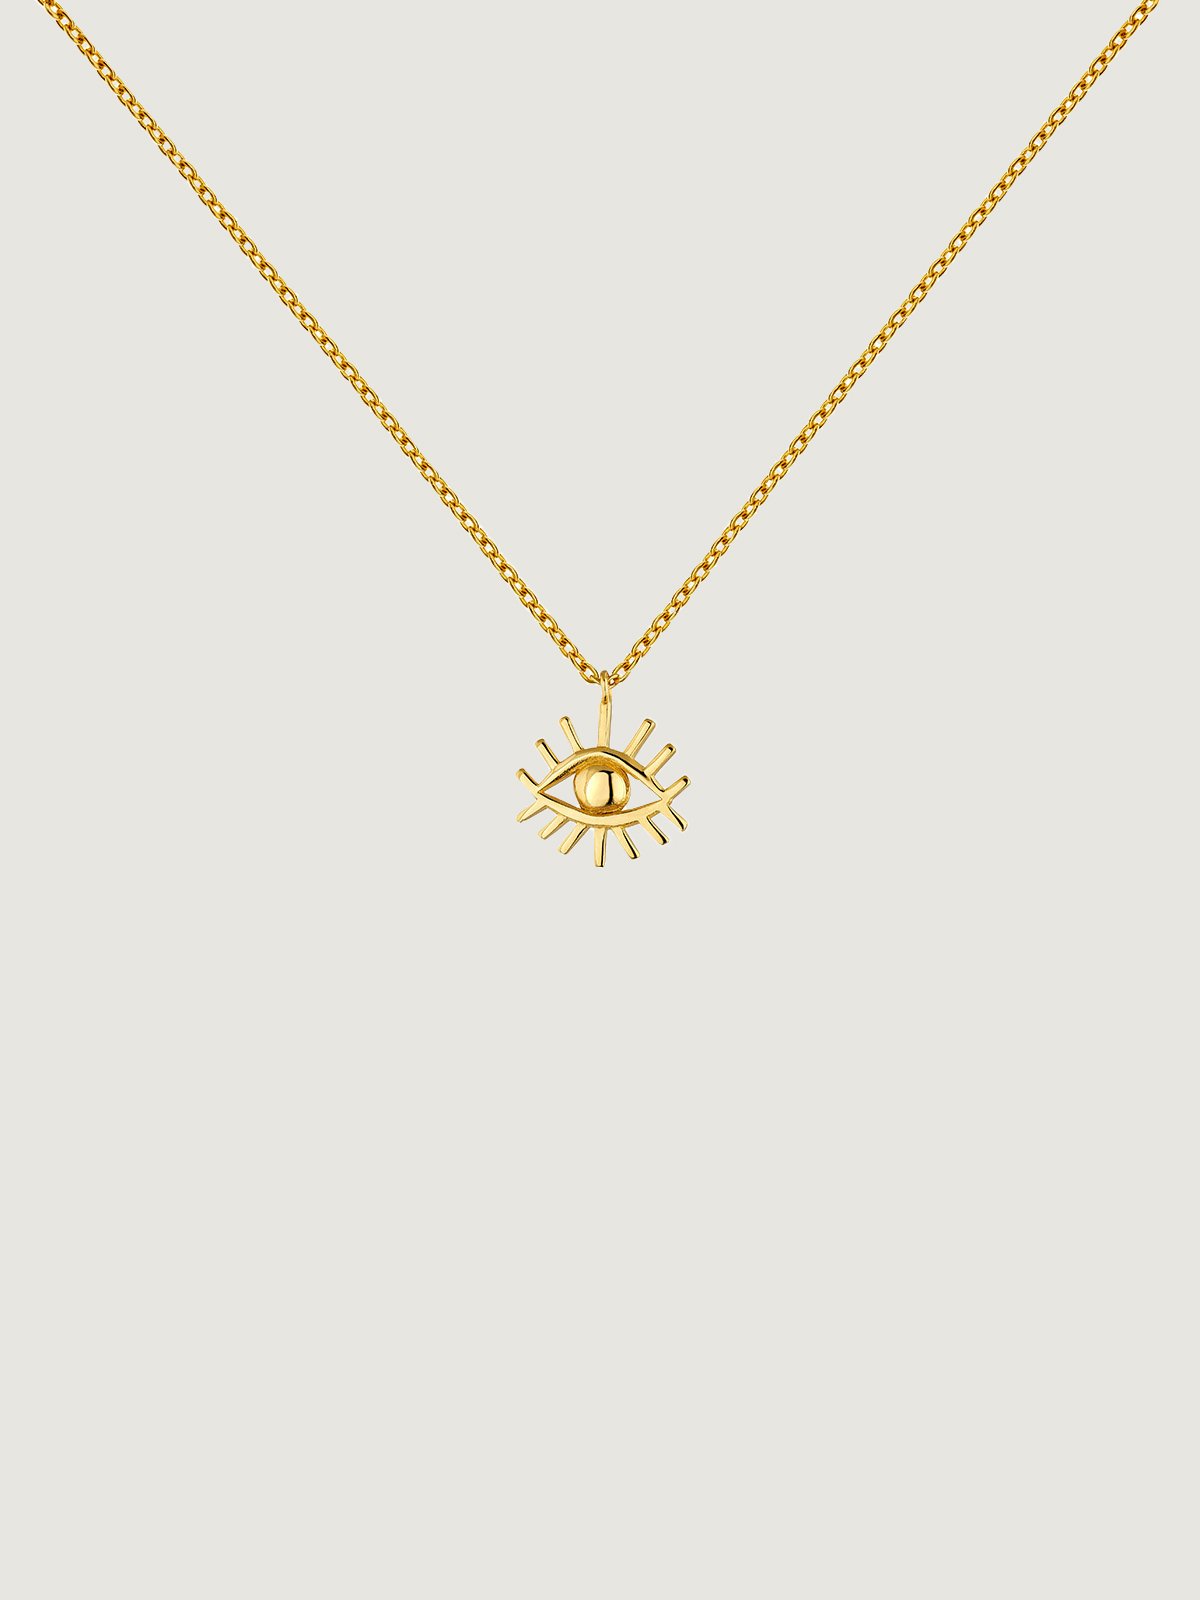 A 925 silver pendant bathed in 18K yellow gold with an eye.